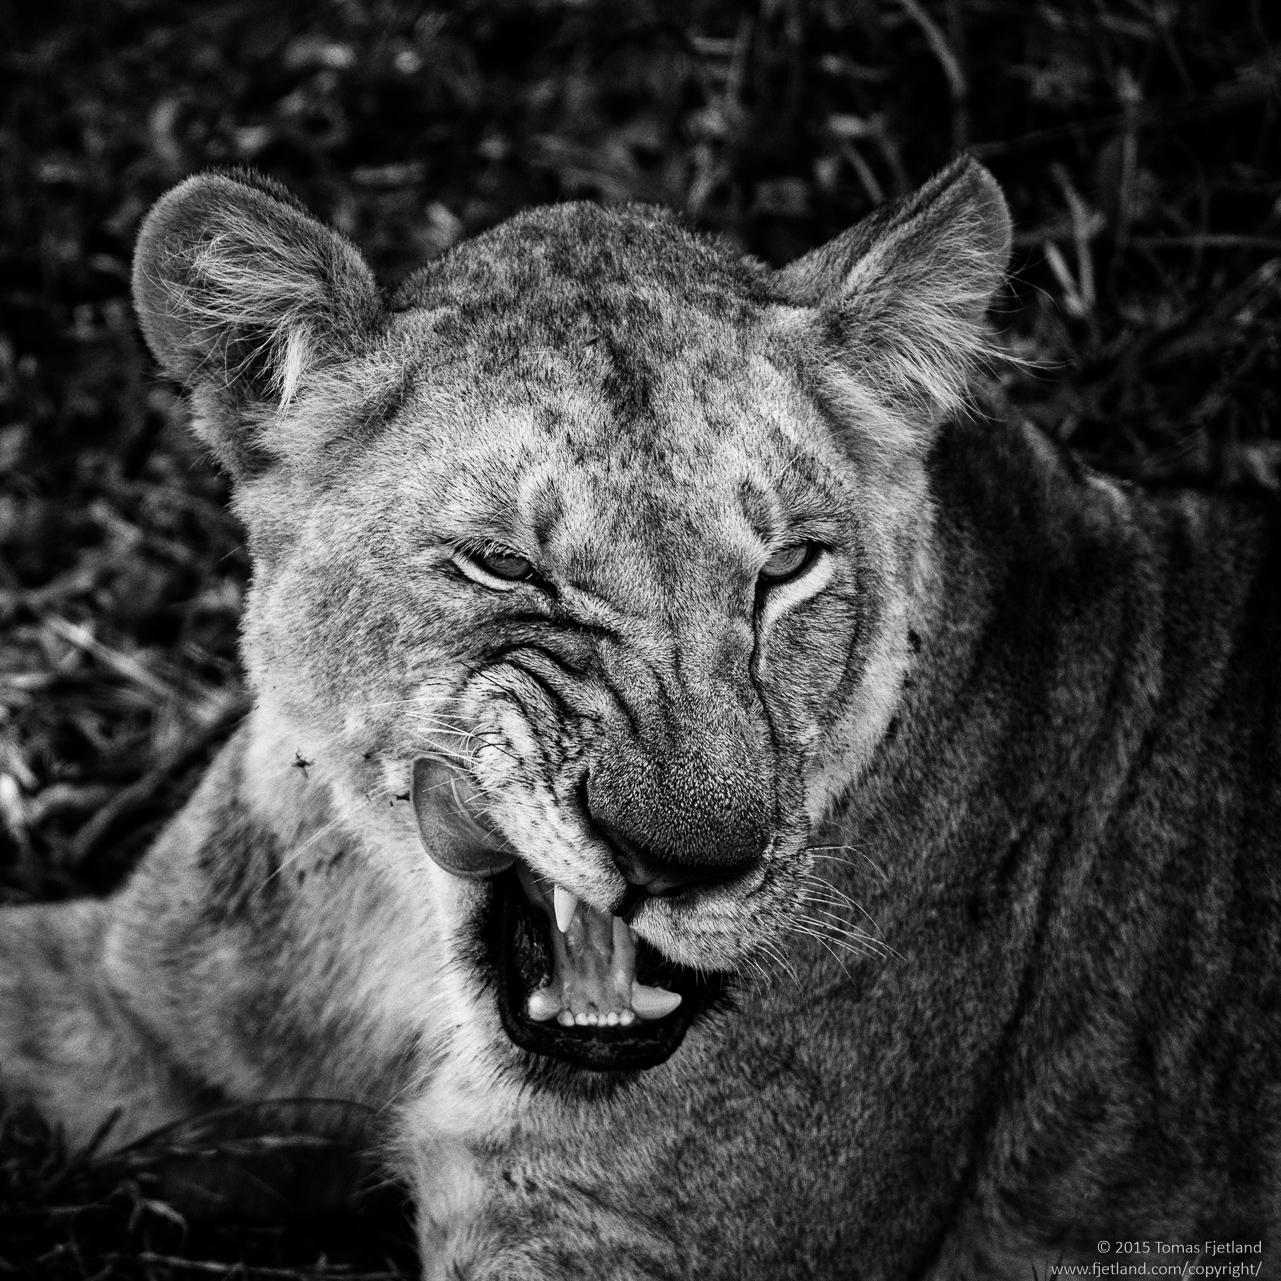 BW portrait of a hungry lioness